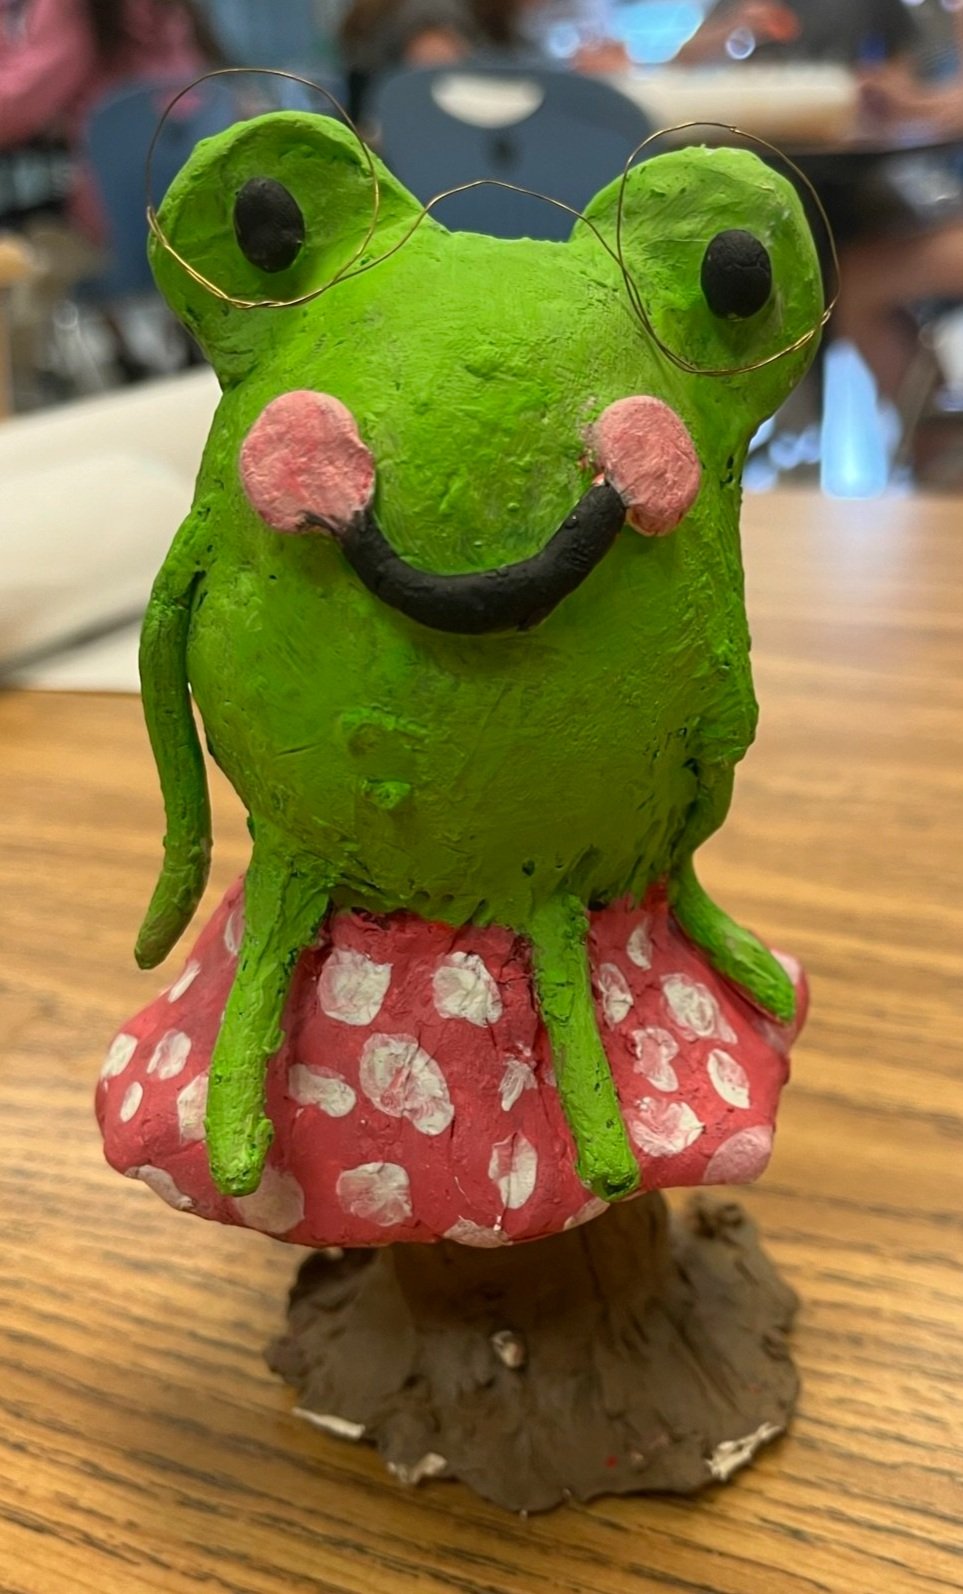 Character Creations in Clay